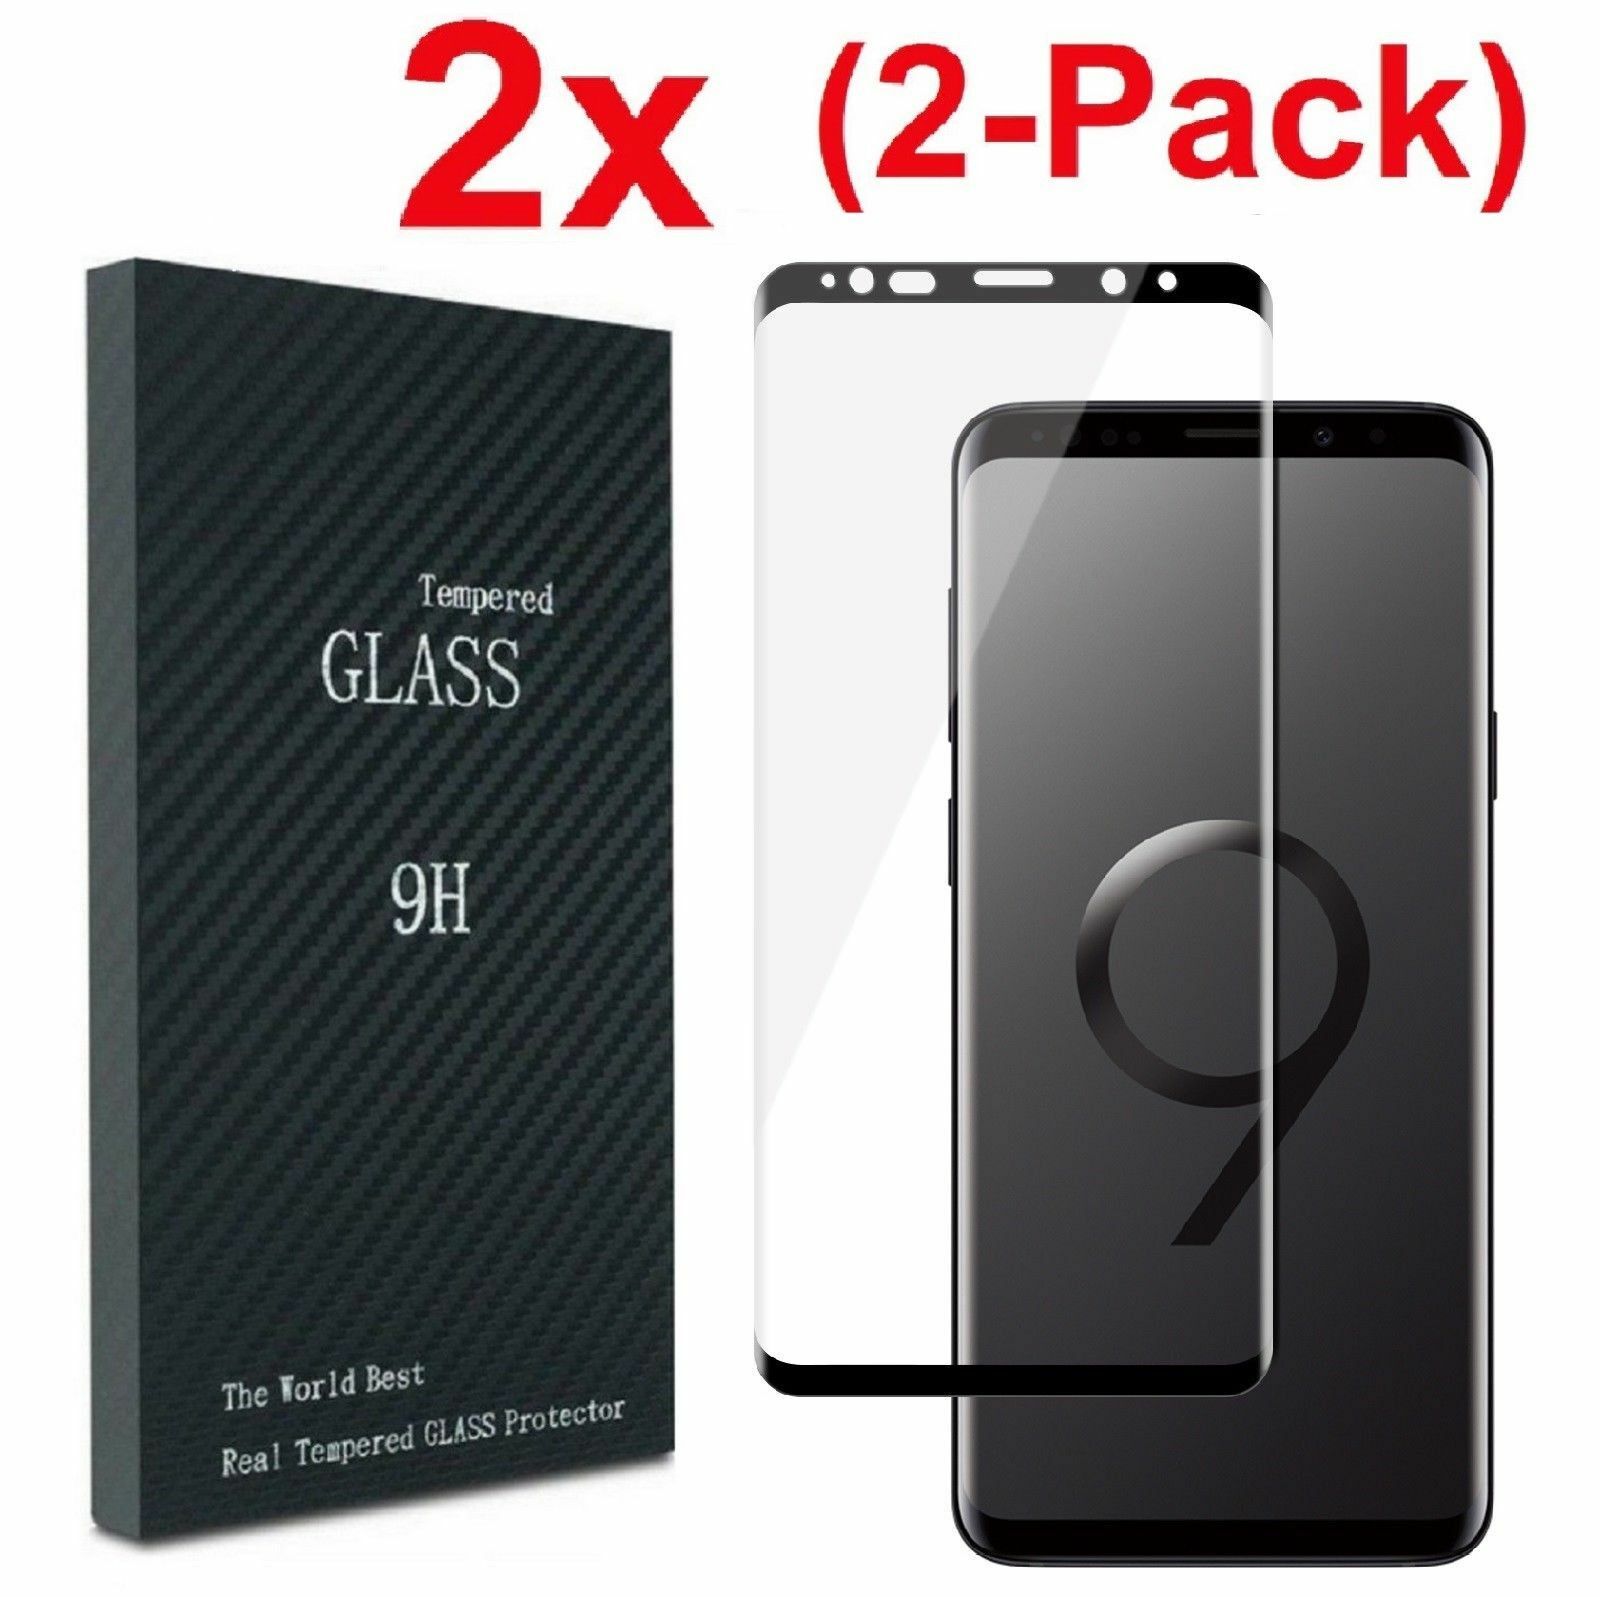 Samsung Galaxy S9 S8 Plus Note 8 4d Full Cover Tempered Glass Screen Protector